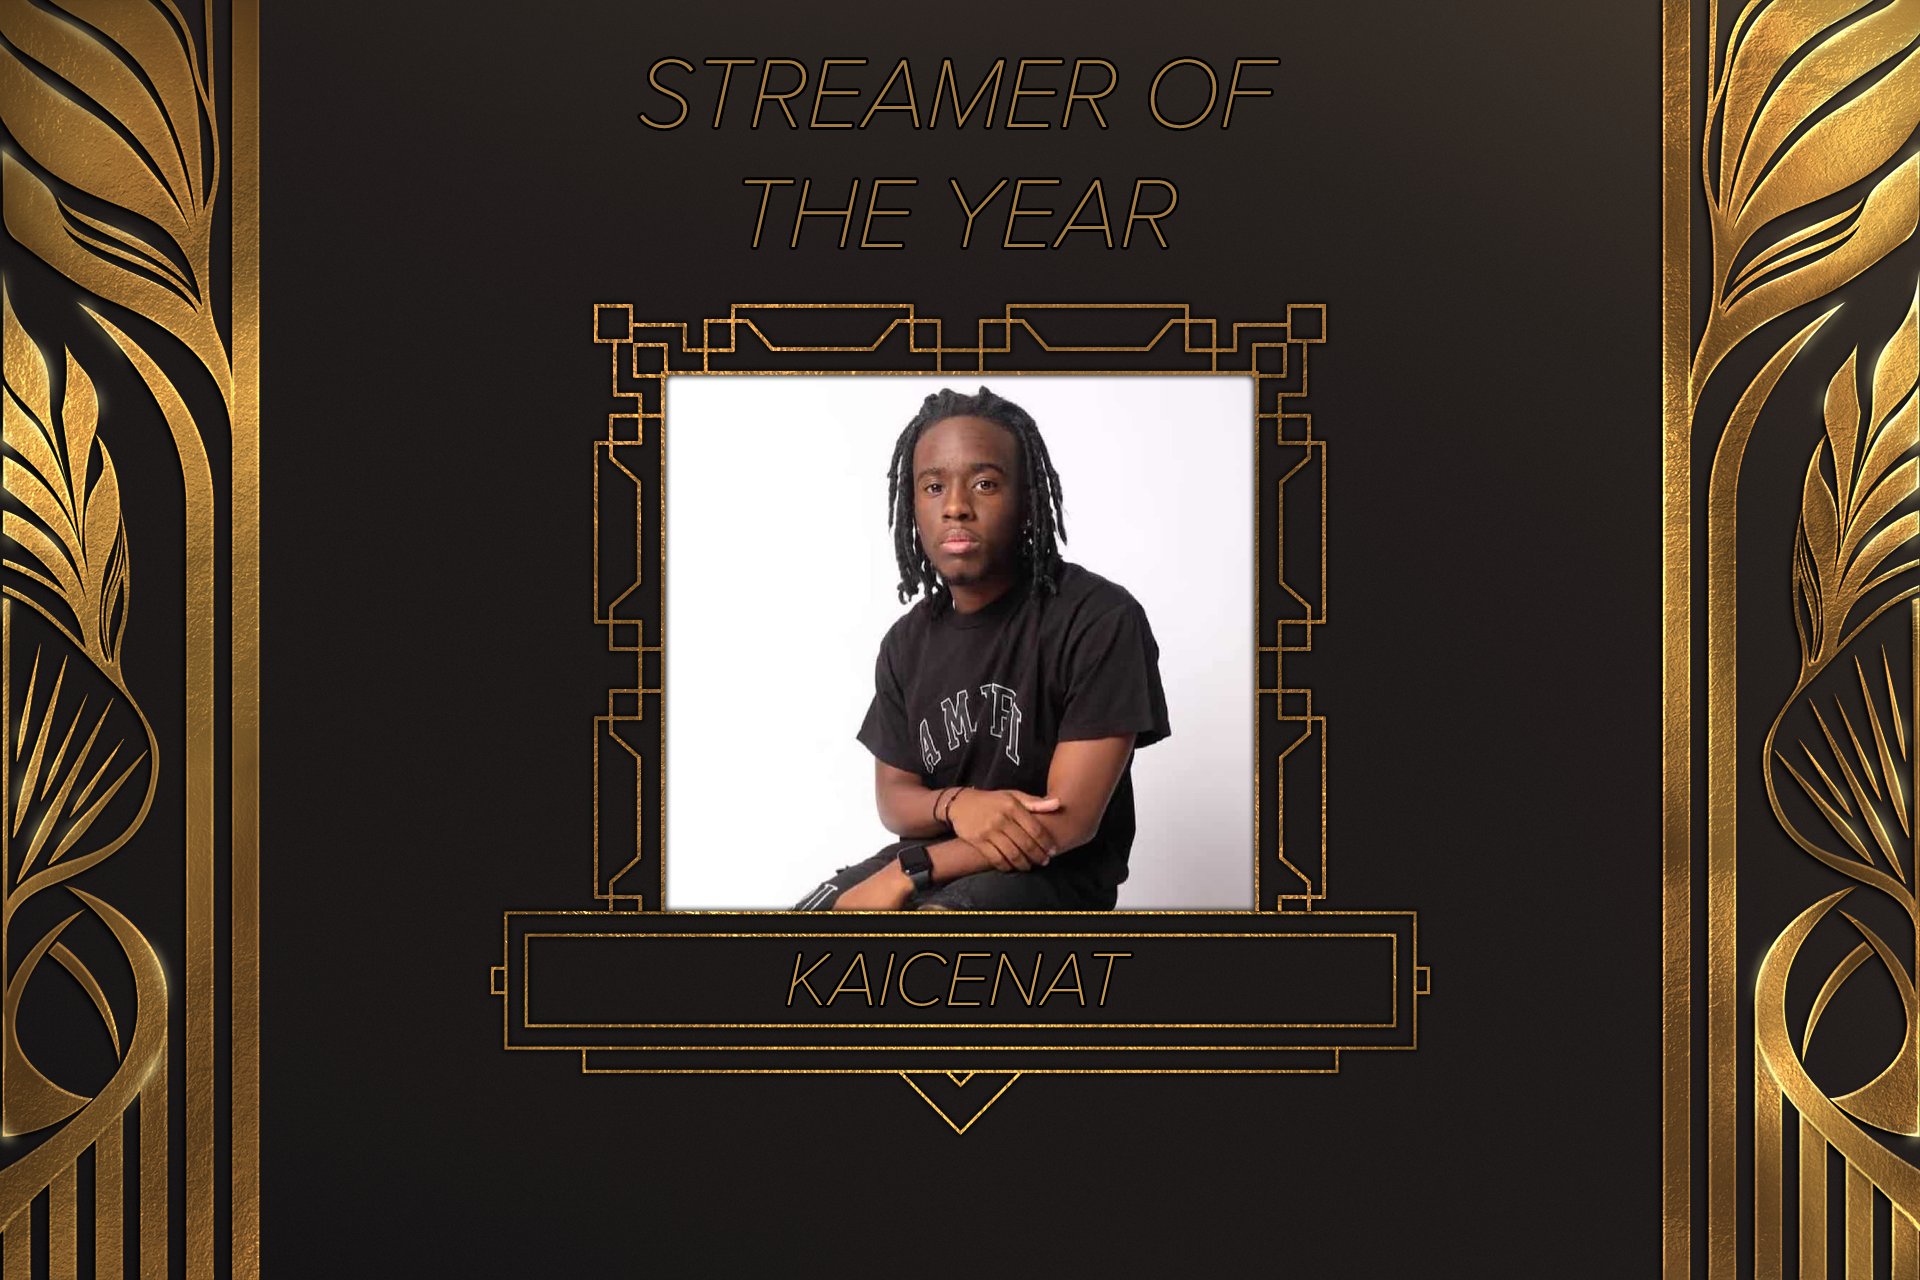 The Streamer Awards 2023 – All Winners & Nominees